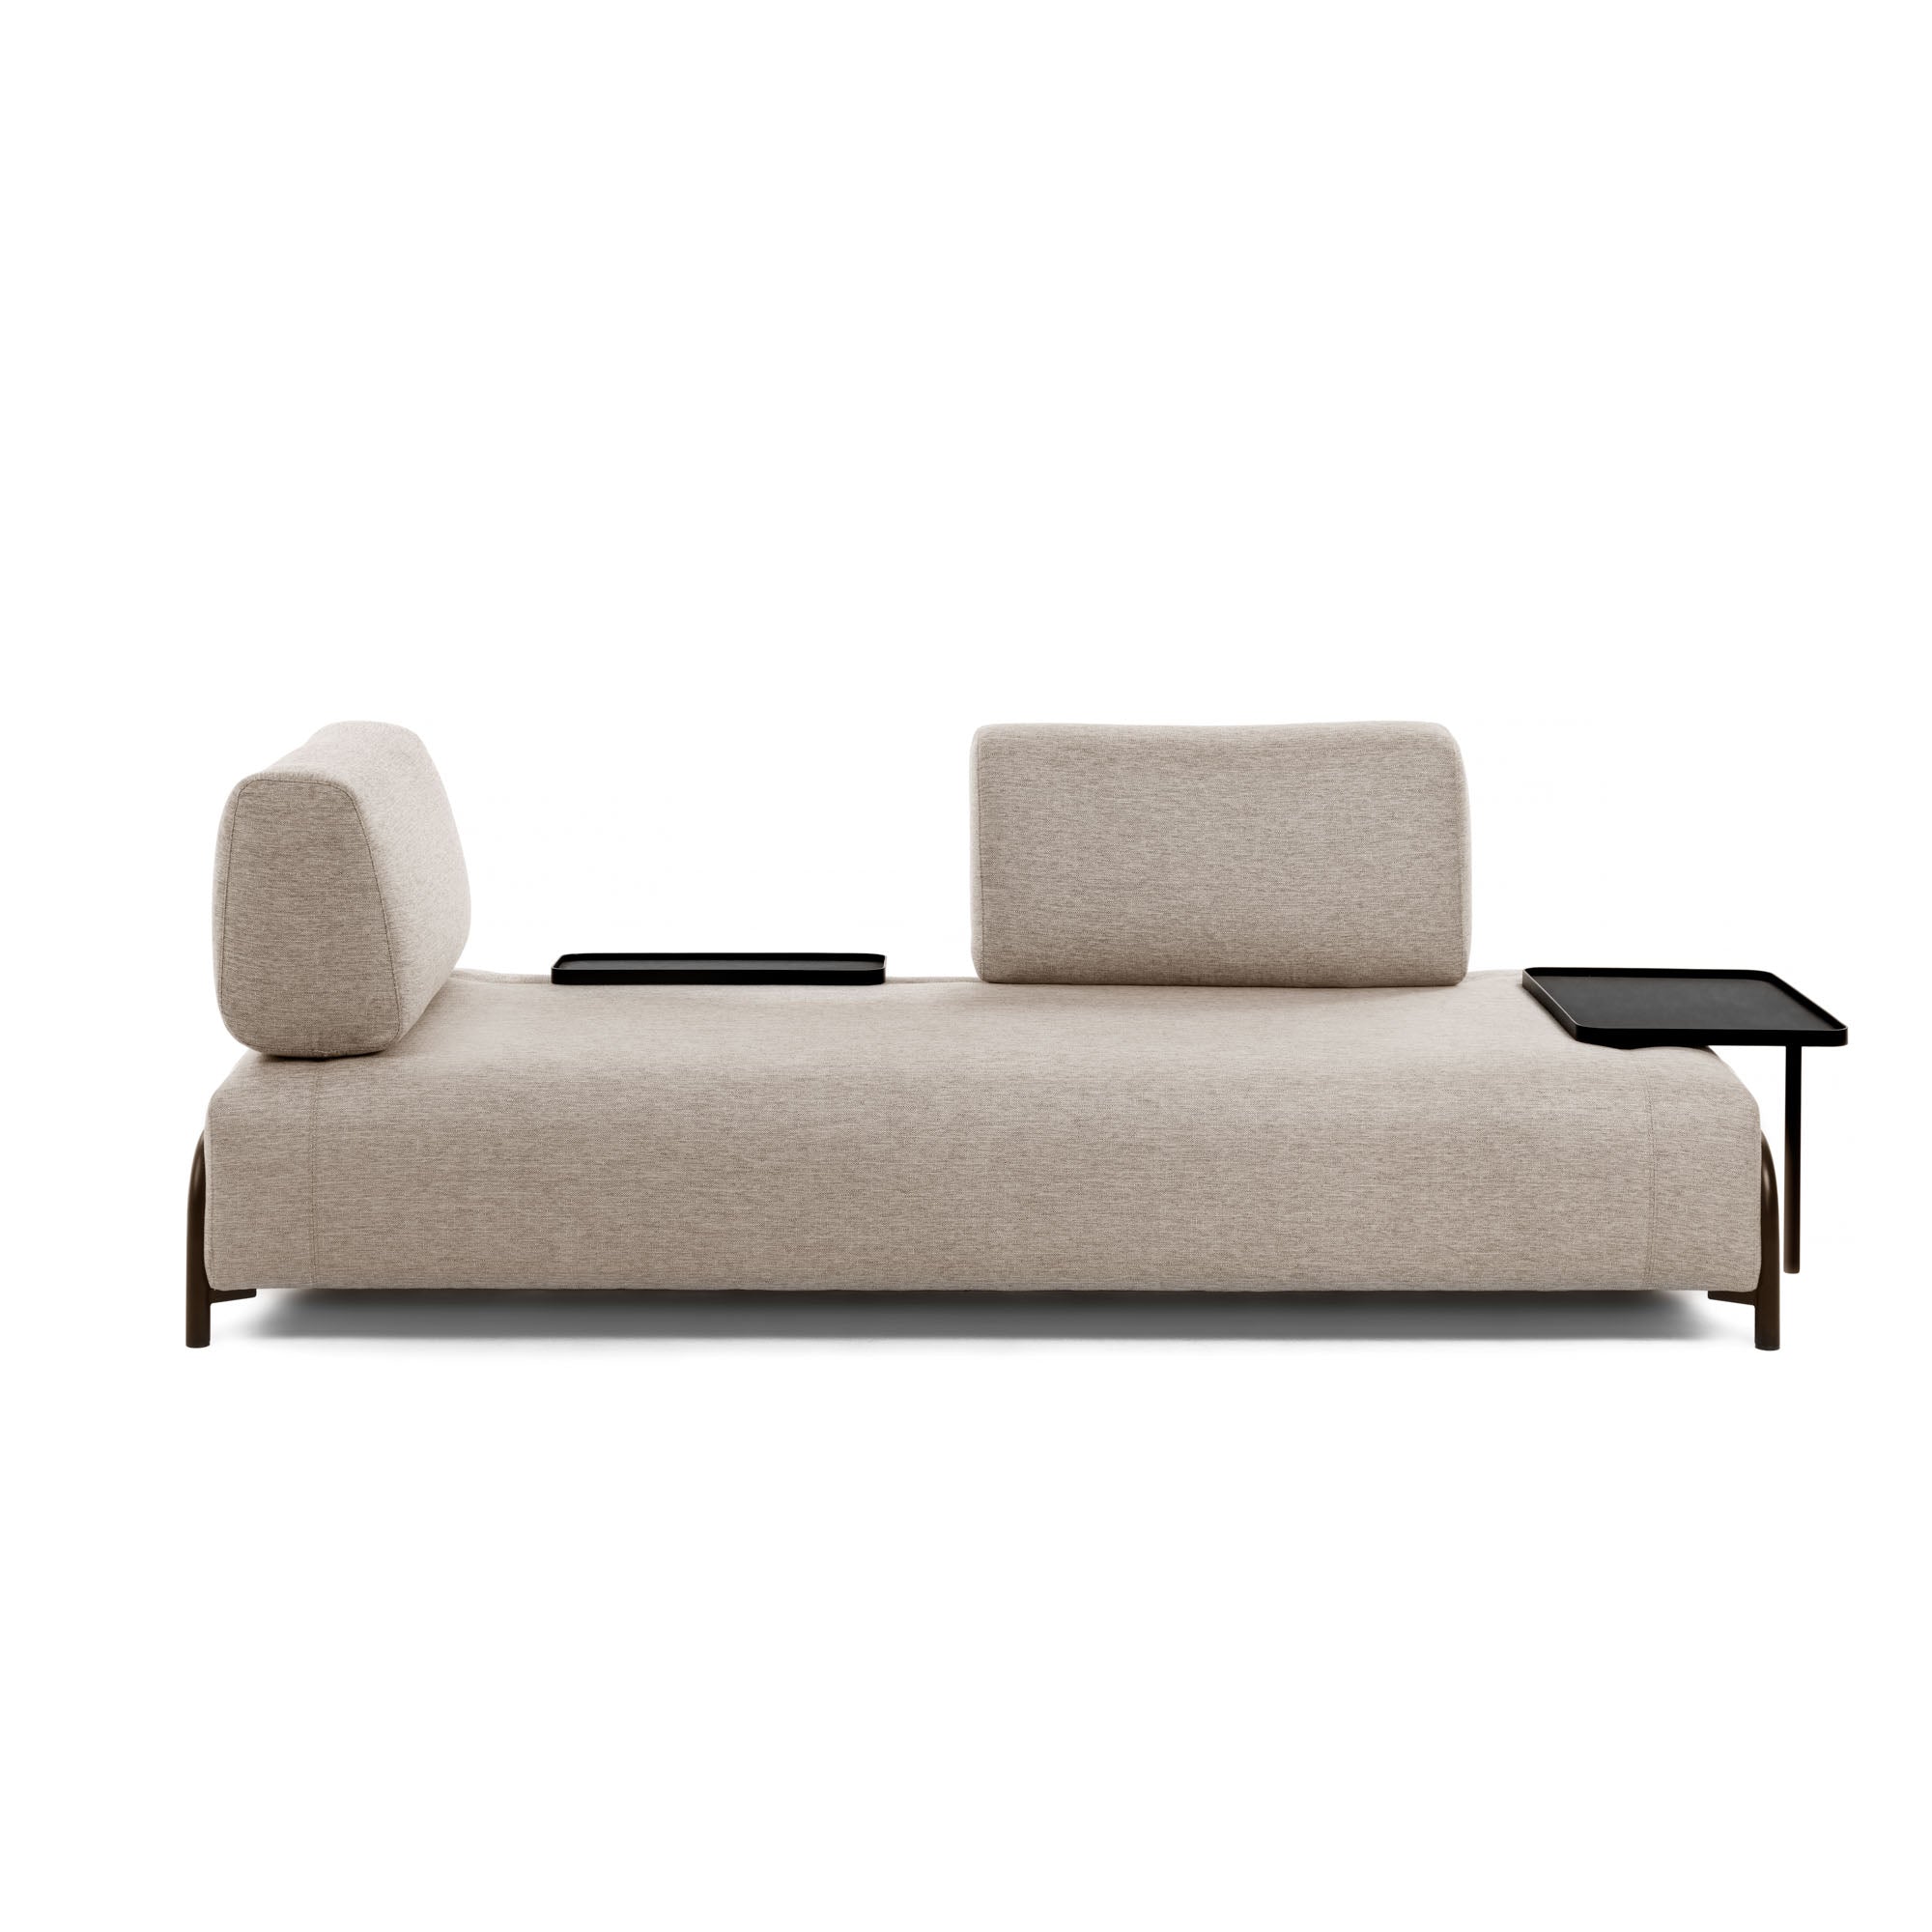 Compo 3 seater sofa with small tray in beige, 232 cm